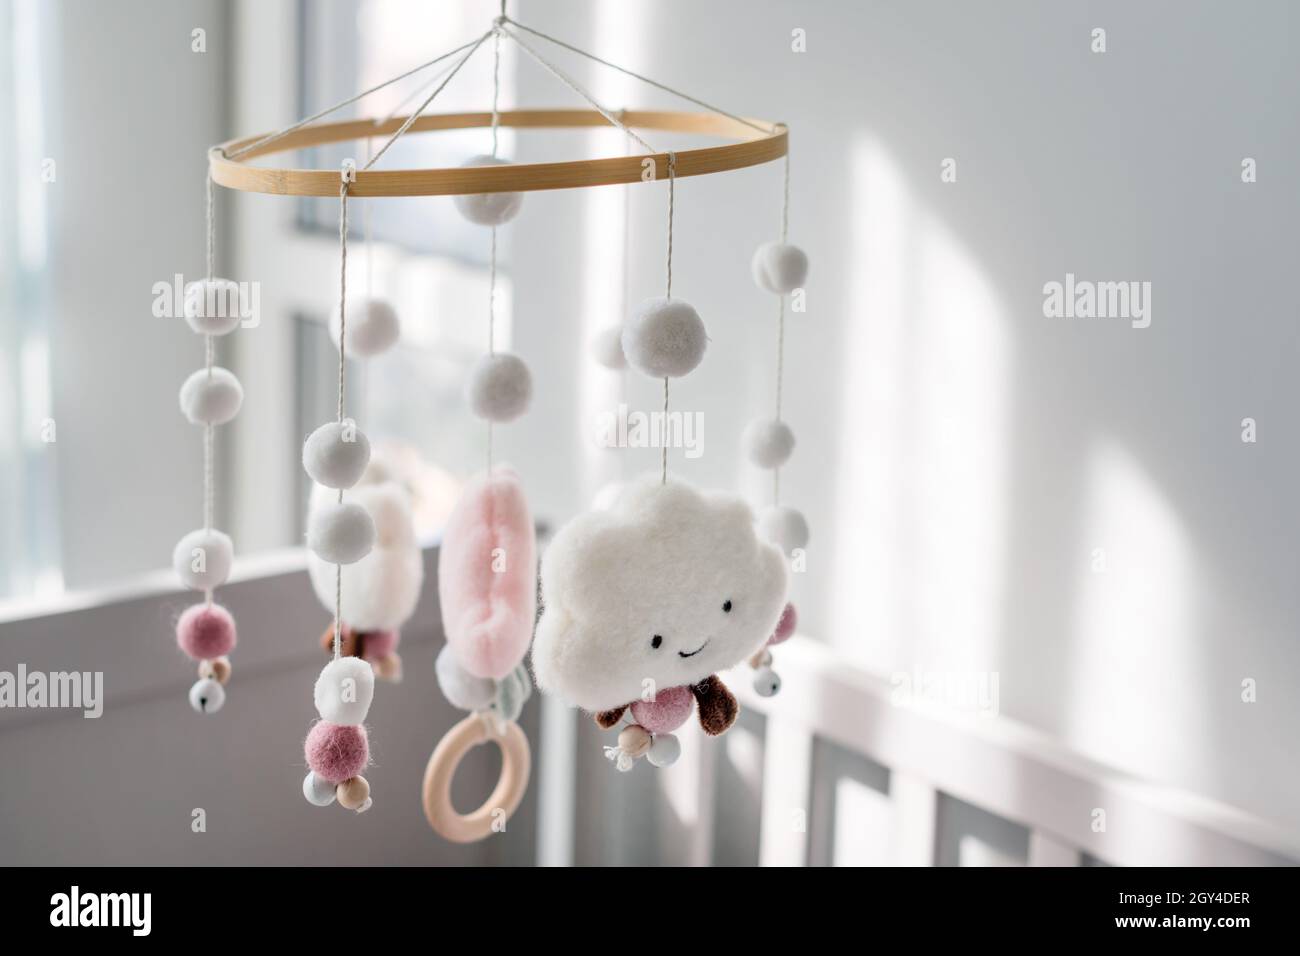 Cloud Baby Mobile Wooden Mobile